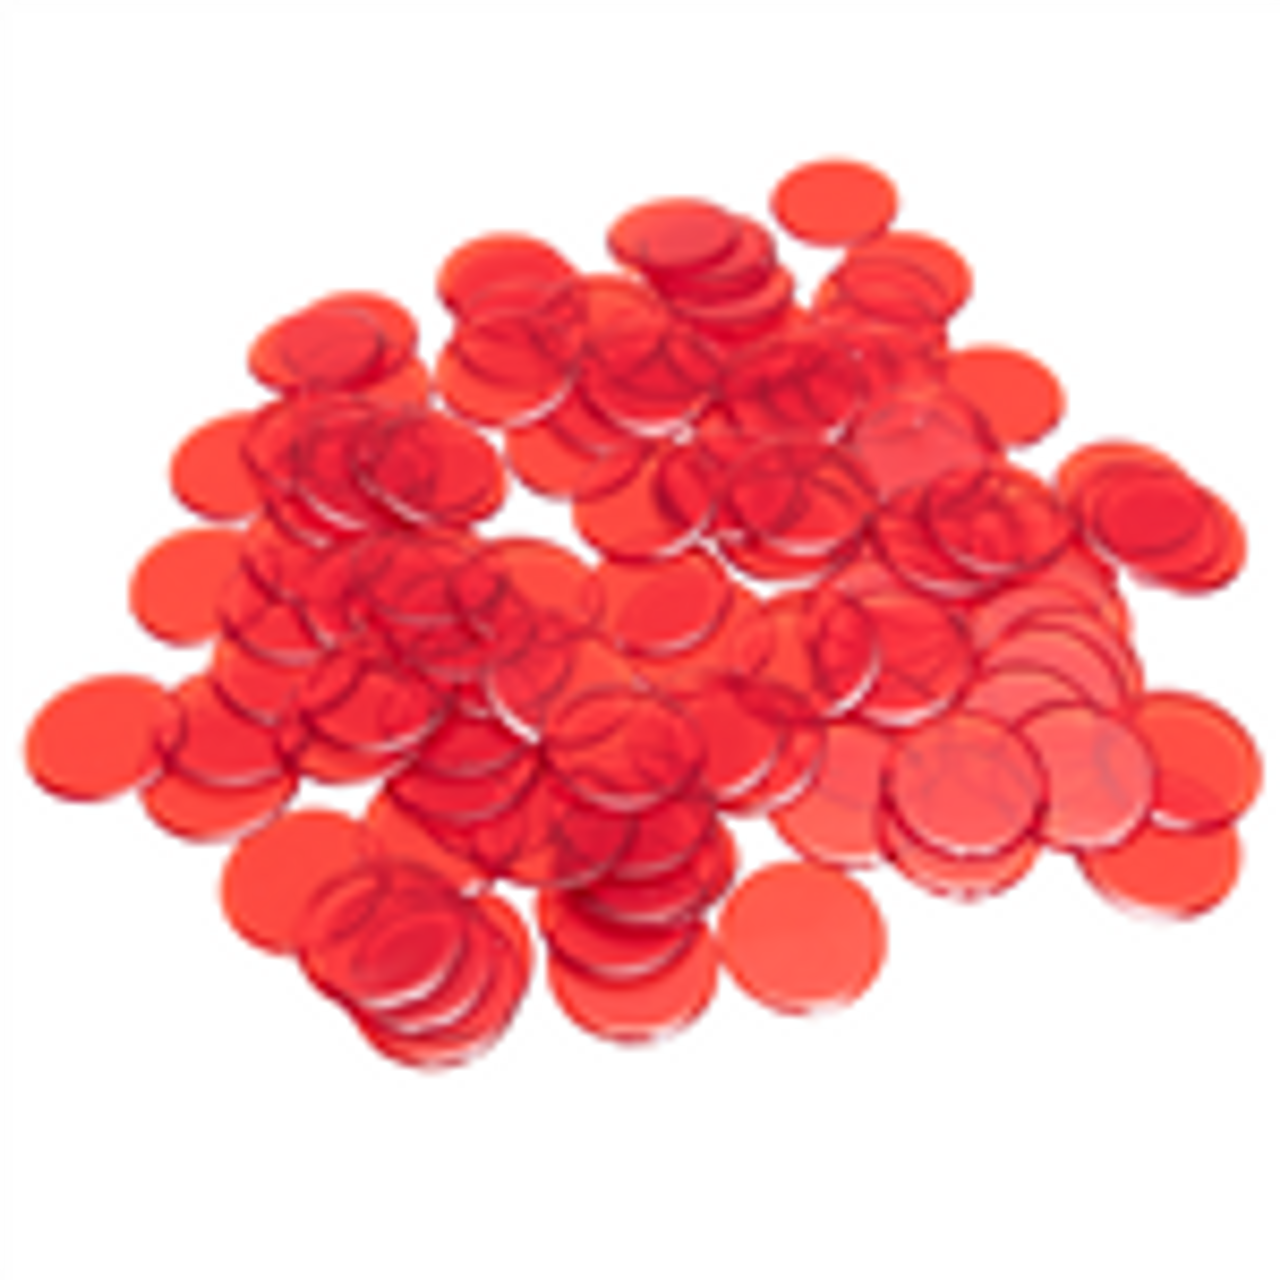 Brand New Red Bingo Spotters 7/8 inch 1 Tub of Red Bingo Chips 250 Count 